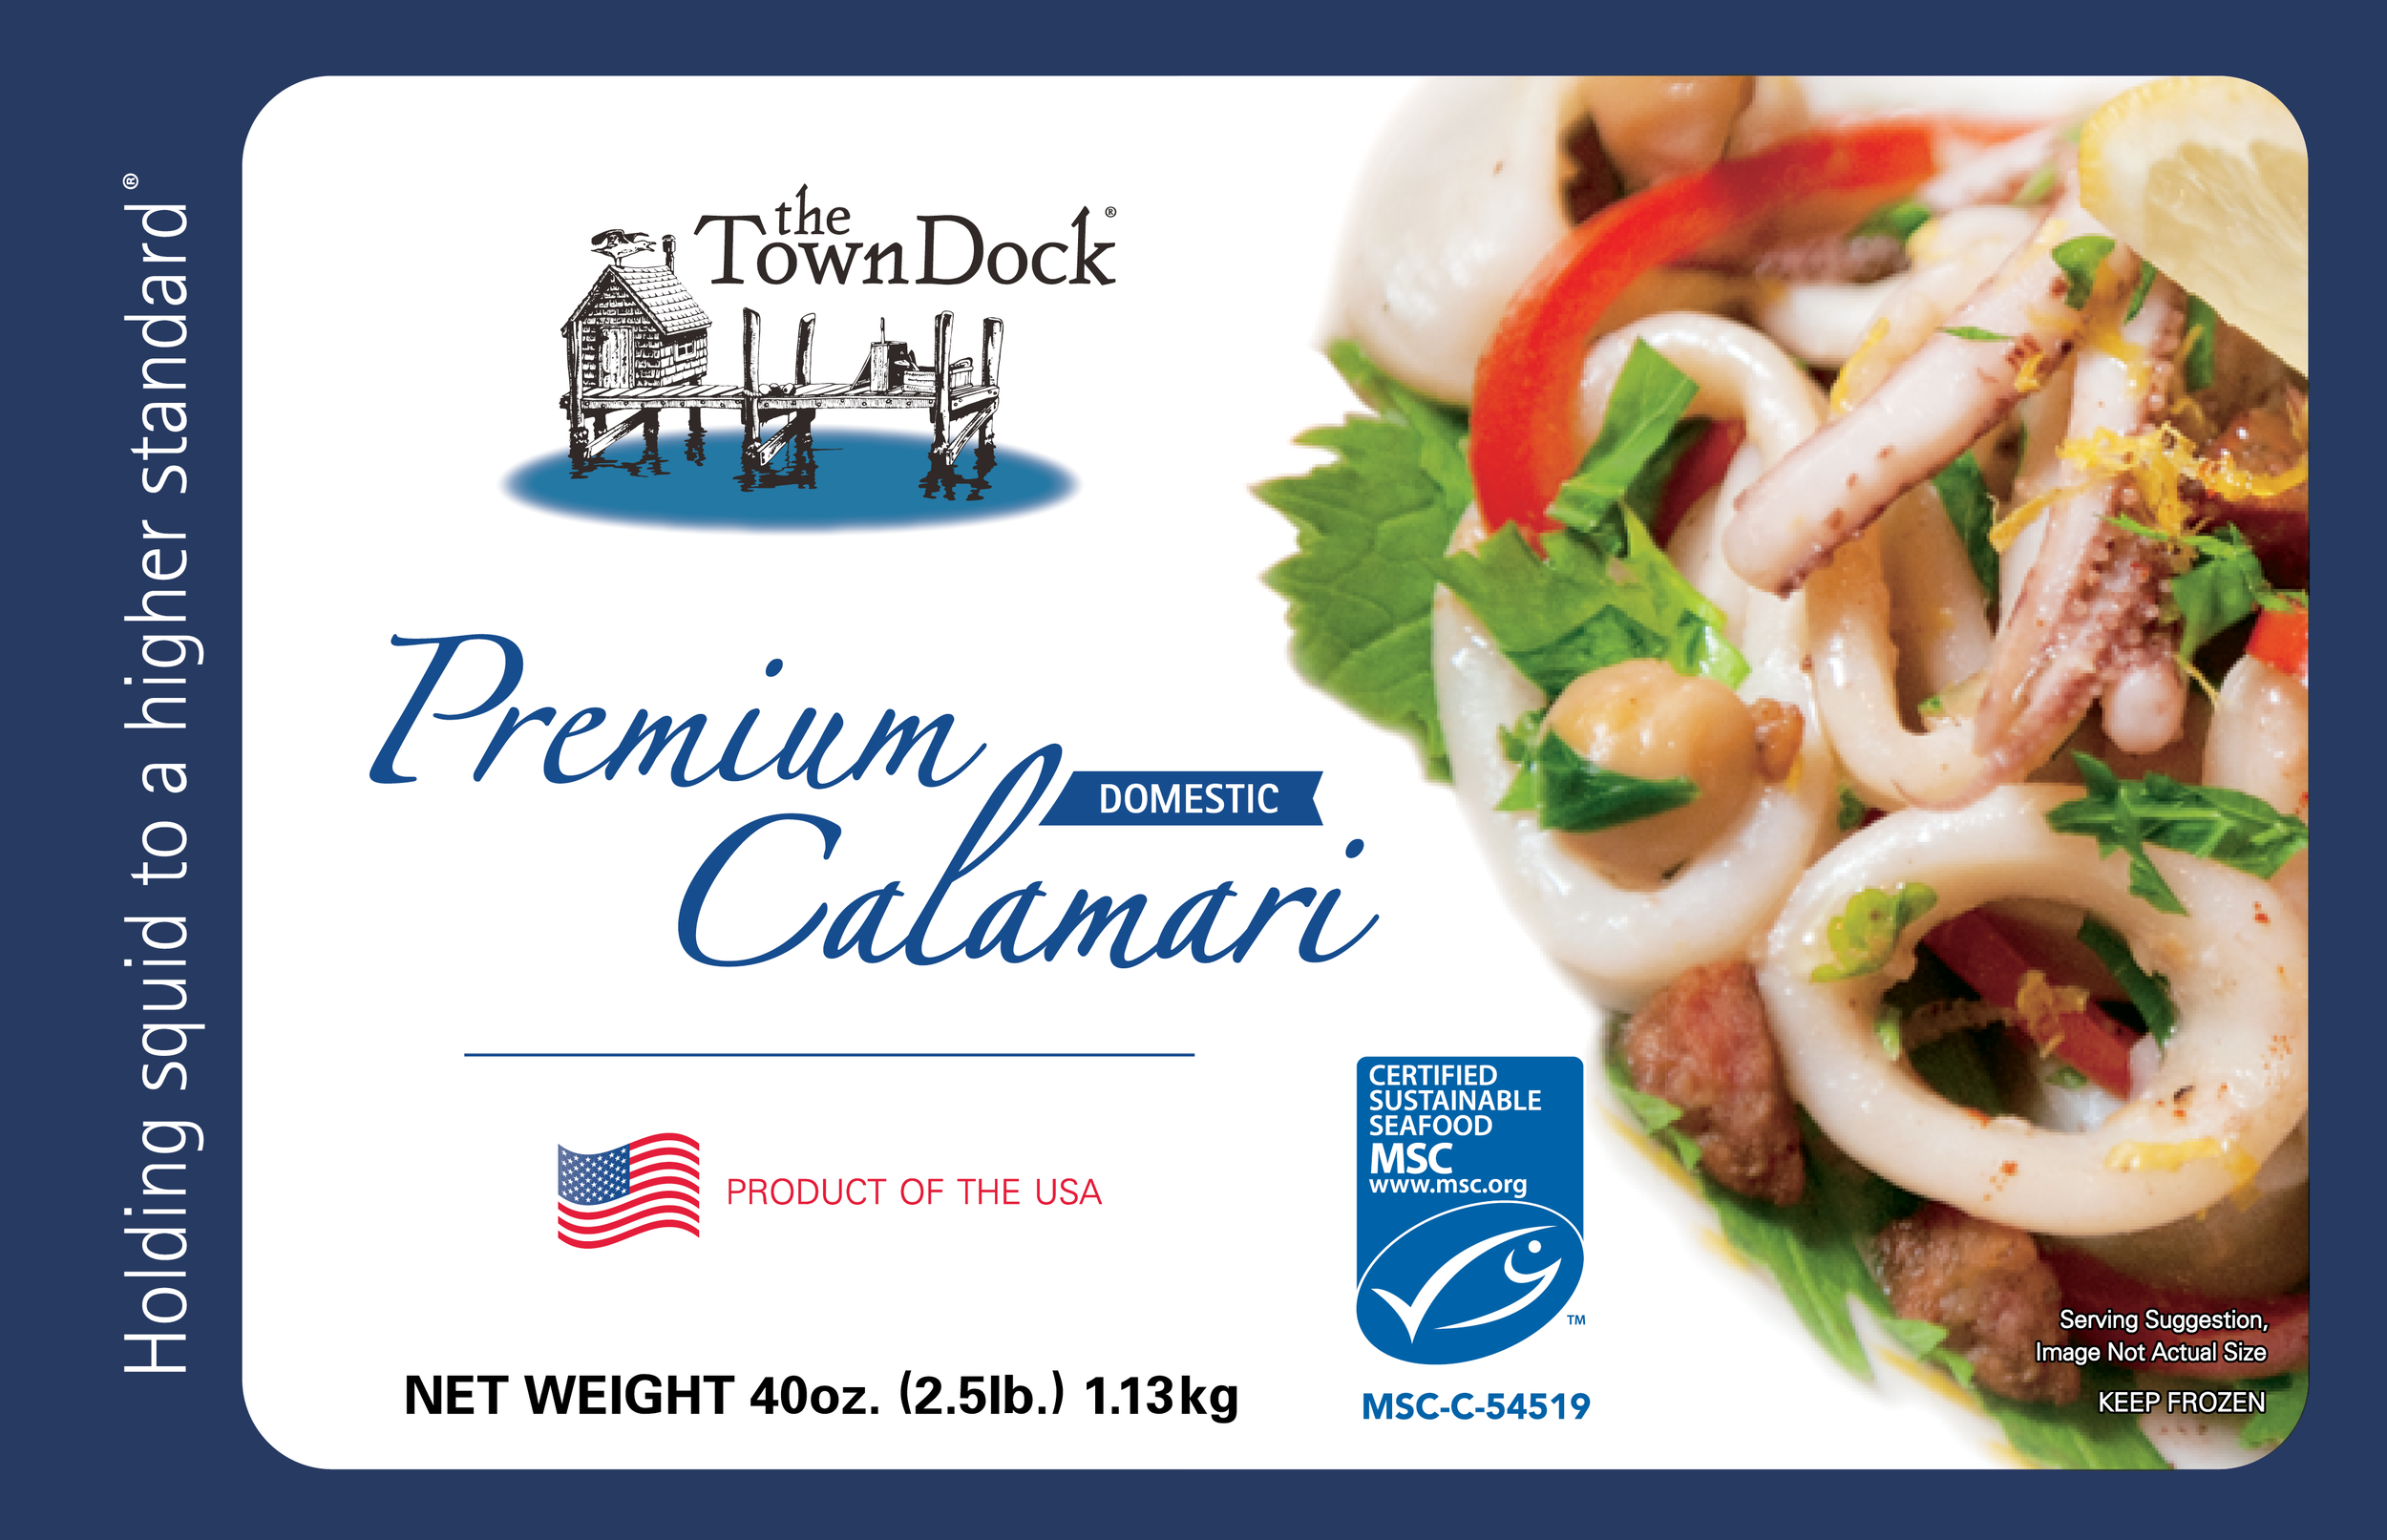 Picture of Premium Domestic Calamari bag, certified sustainable seafood and product of USA squid, which has a dark blue border